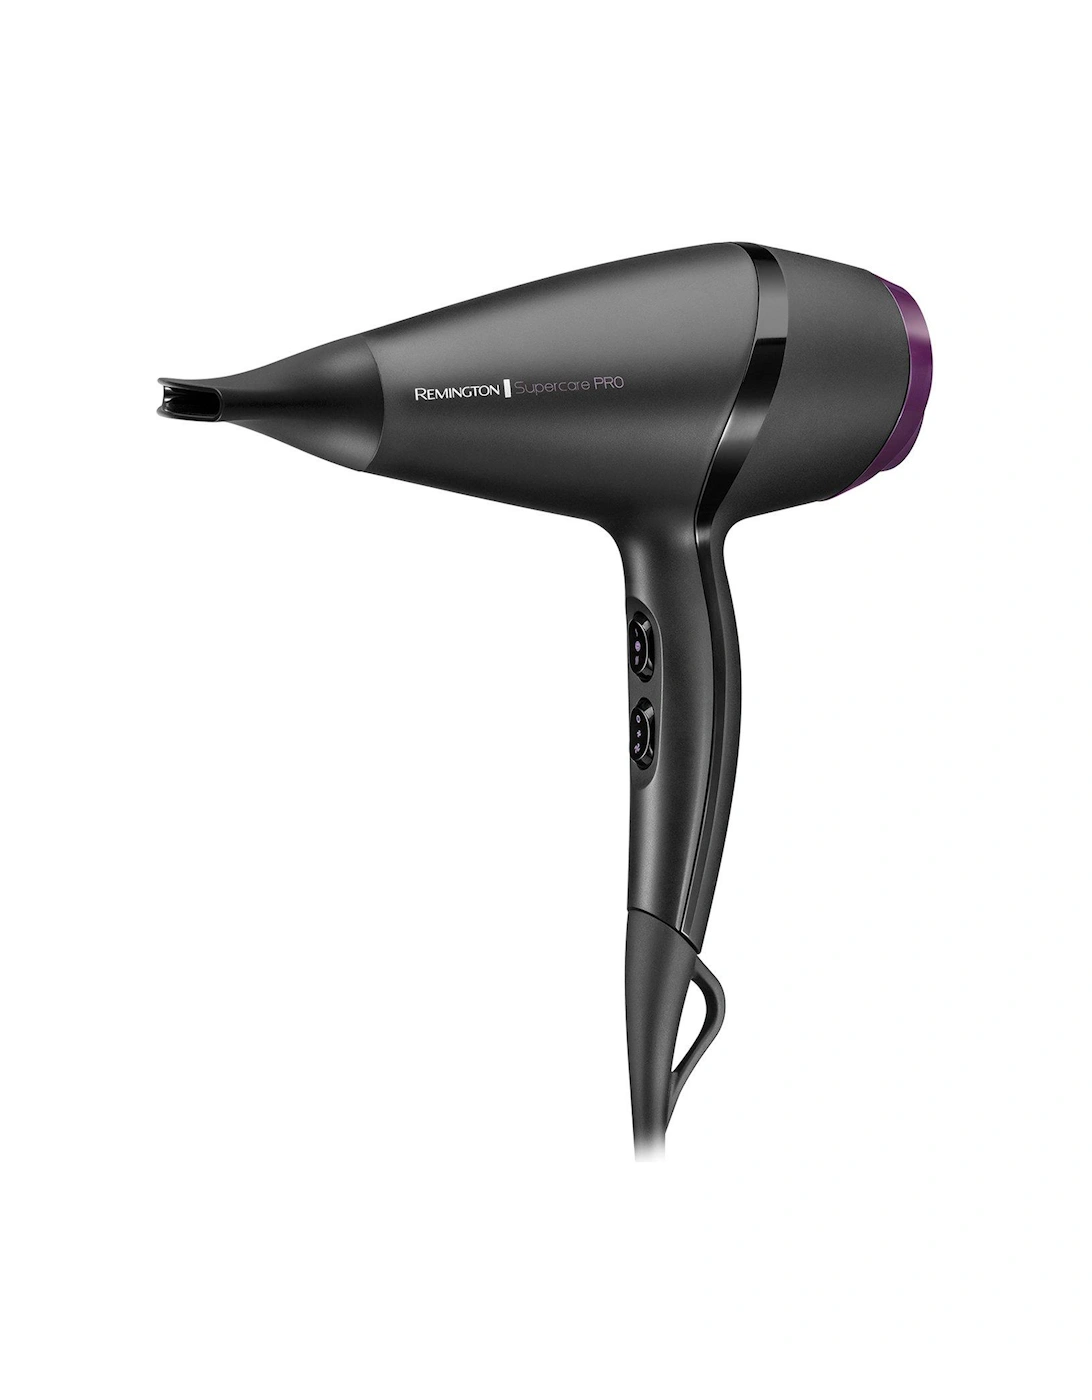 Supercare Pro Hair Dryer 2100W – AC7100, 3 of 2